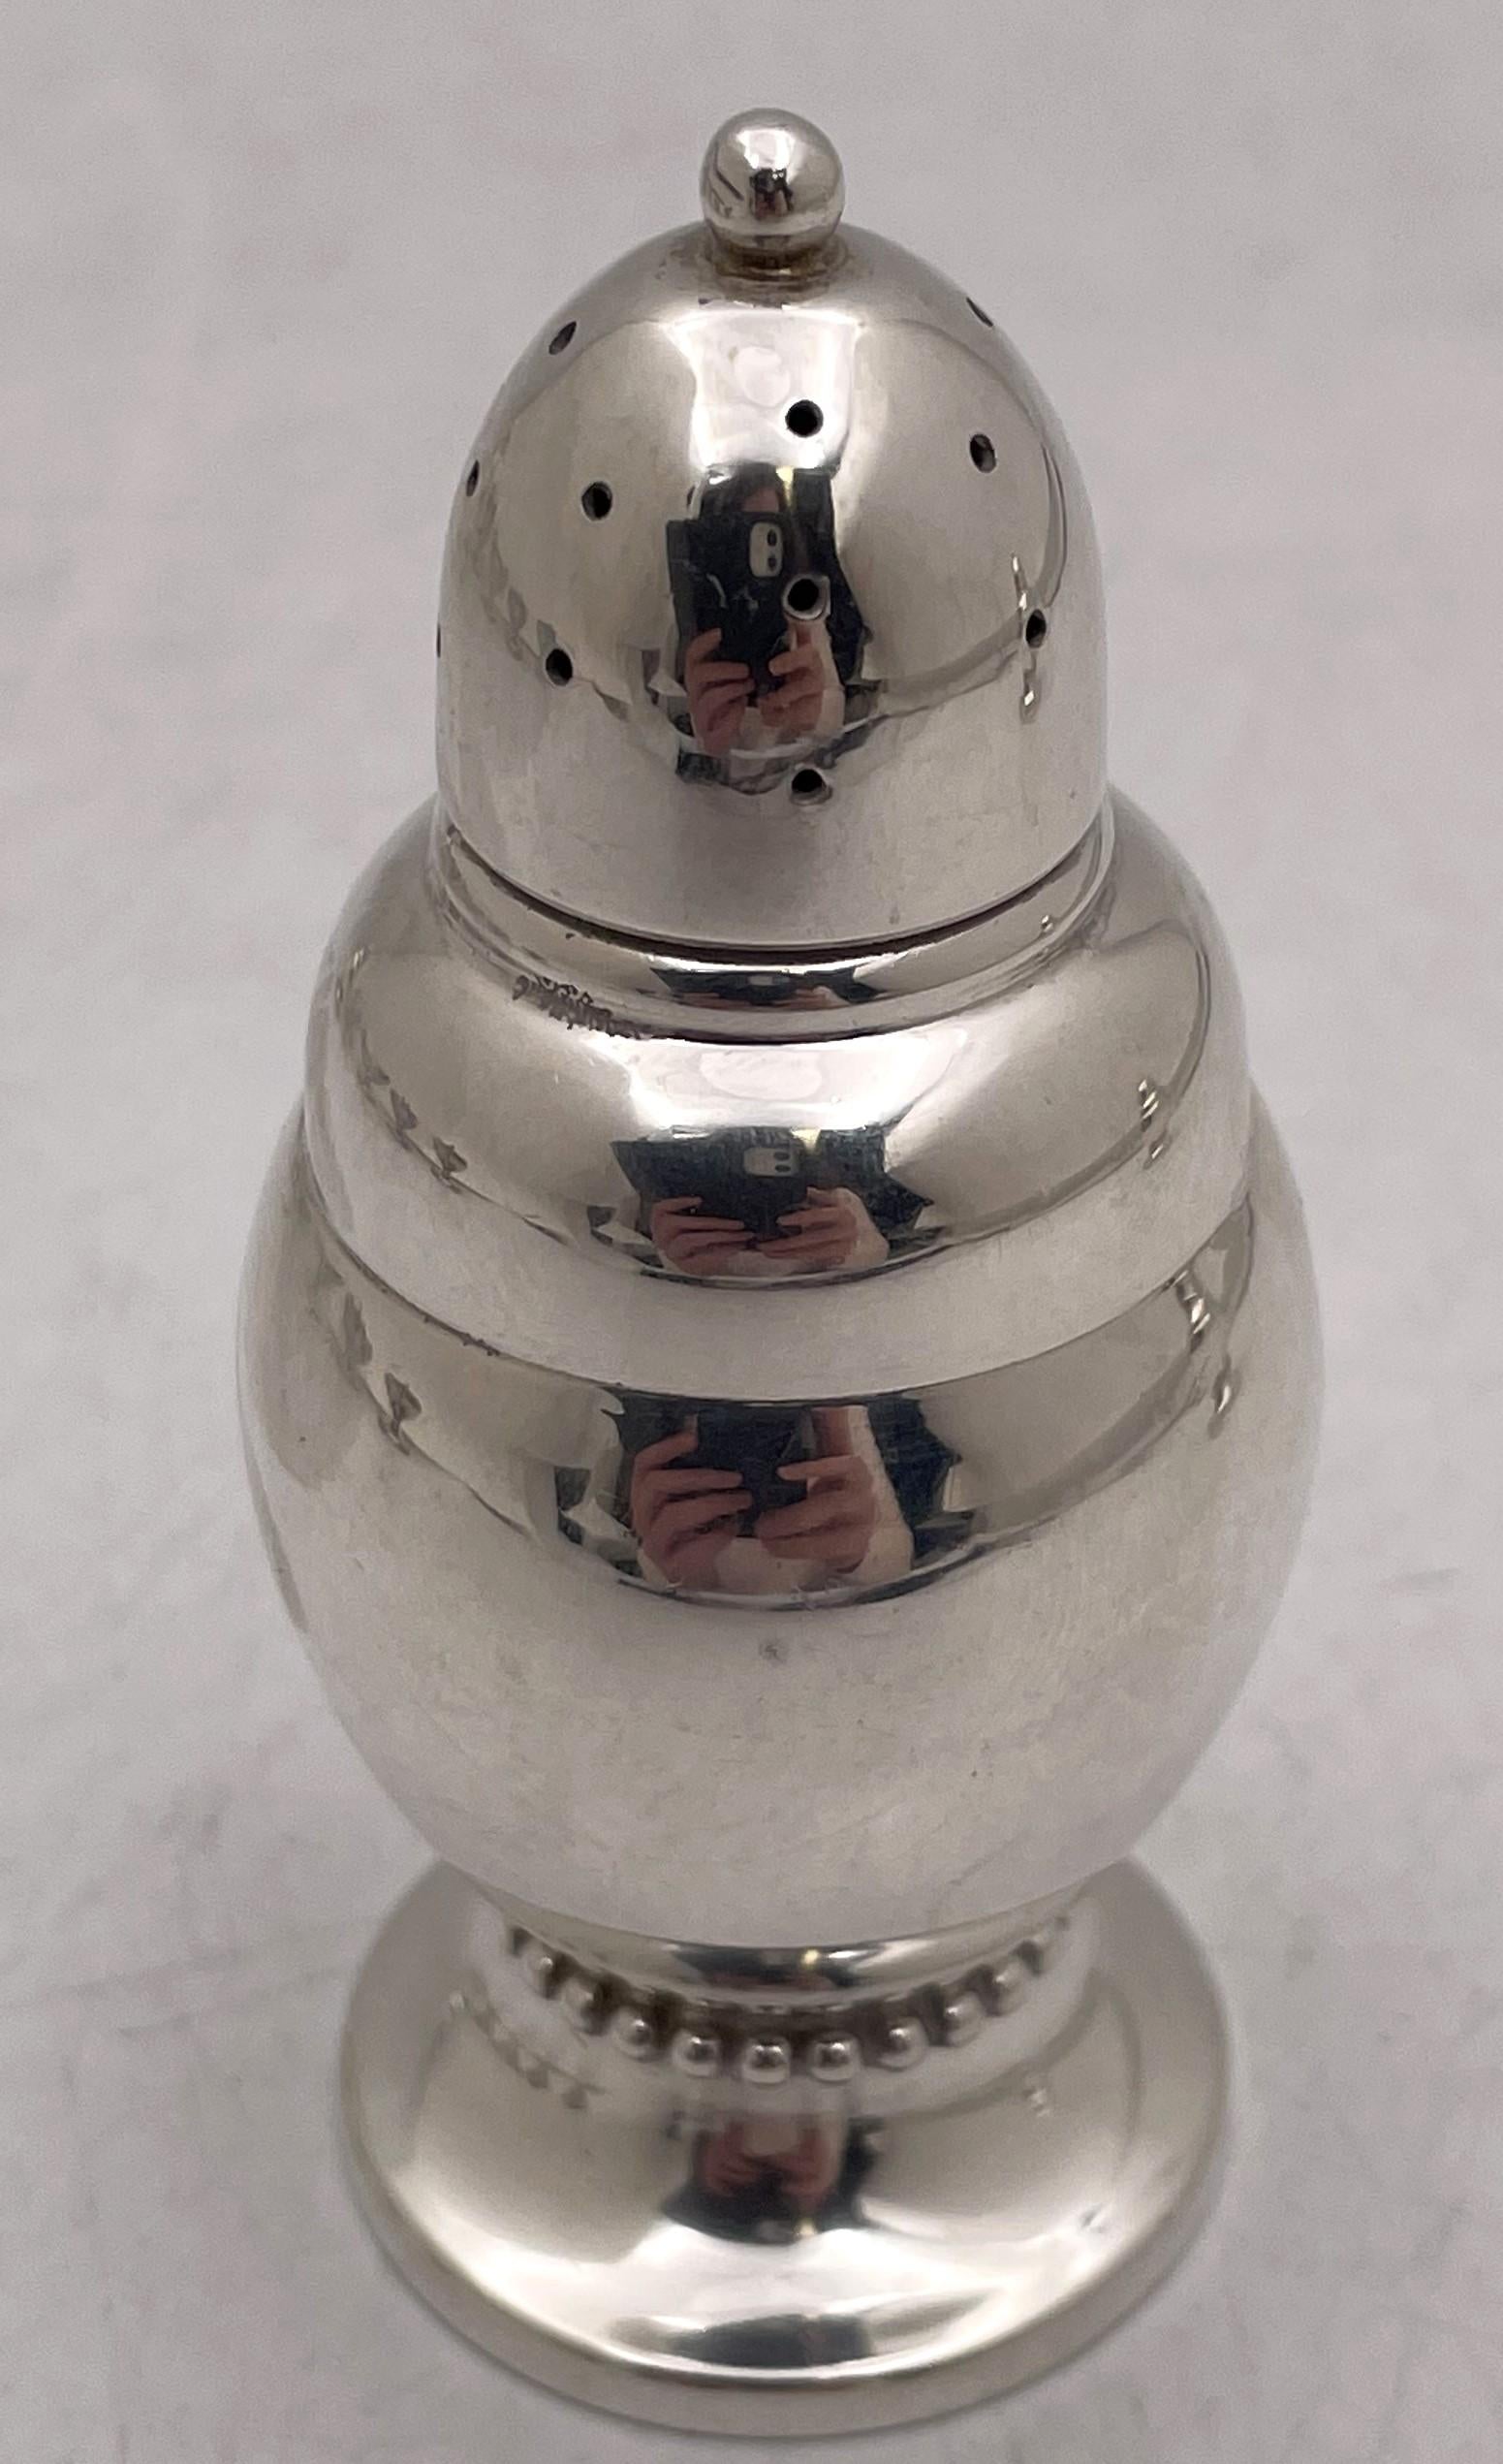 Randahl pair of sterling silver salt and pepper shakers in Arts & Crafts style, one with a gilt top, with beaded motifs at the base. They measure 3 1/2'' in height by 1 2/3'' in diameter, weigh 4 troy ounces, and bear hallmarks as shown. 

Along